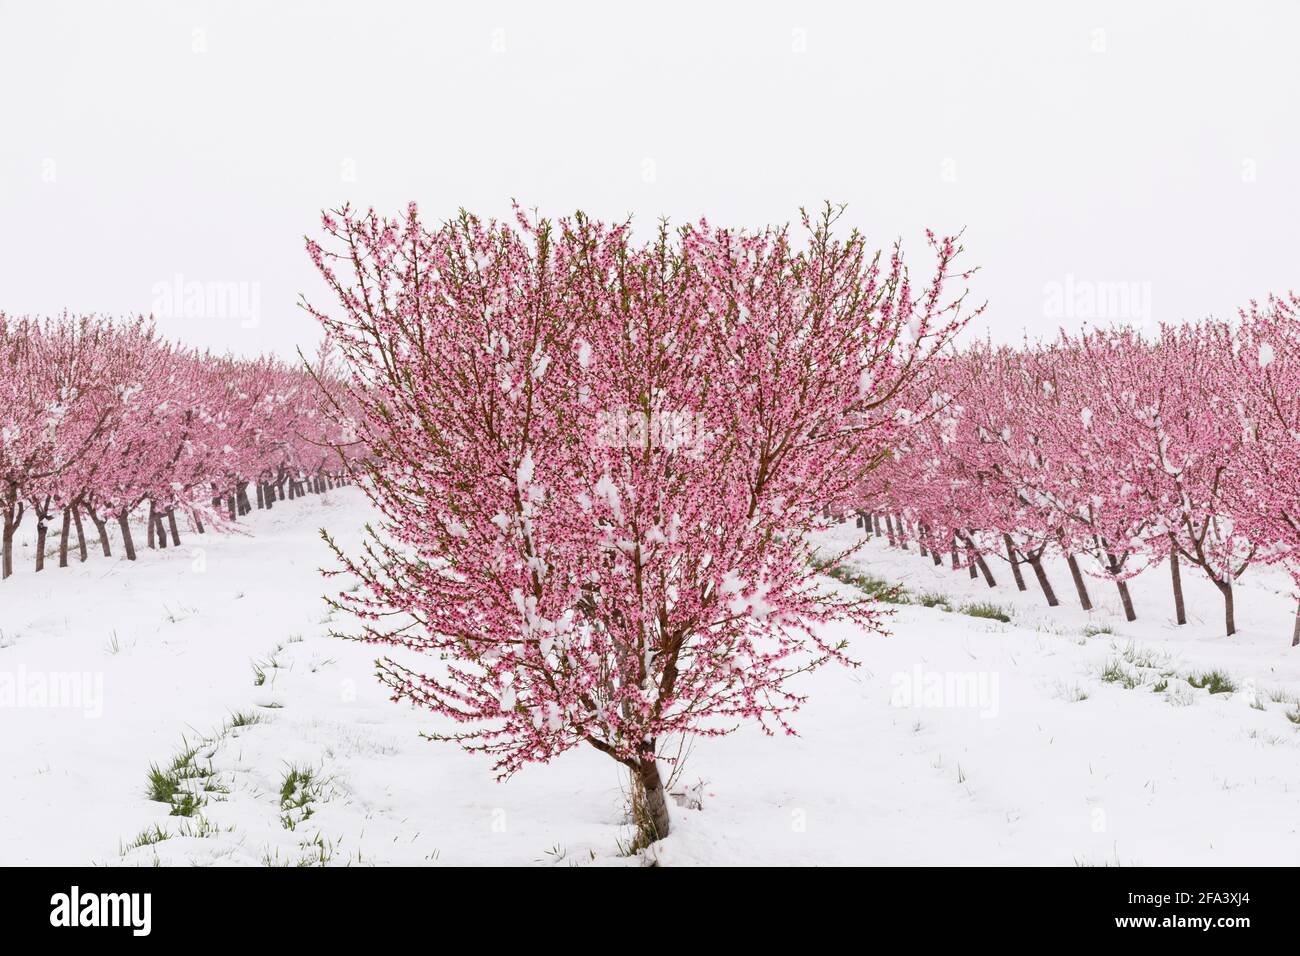 Canada,Ontario, Niagara on the Lake, Peach orchard in bloom covered in a rare spring snowfall. Stock Photo